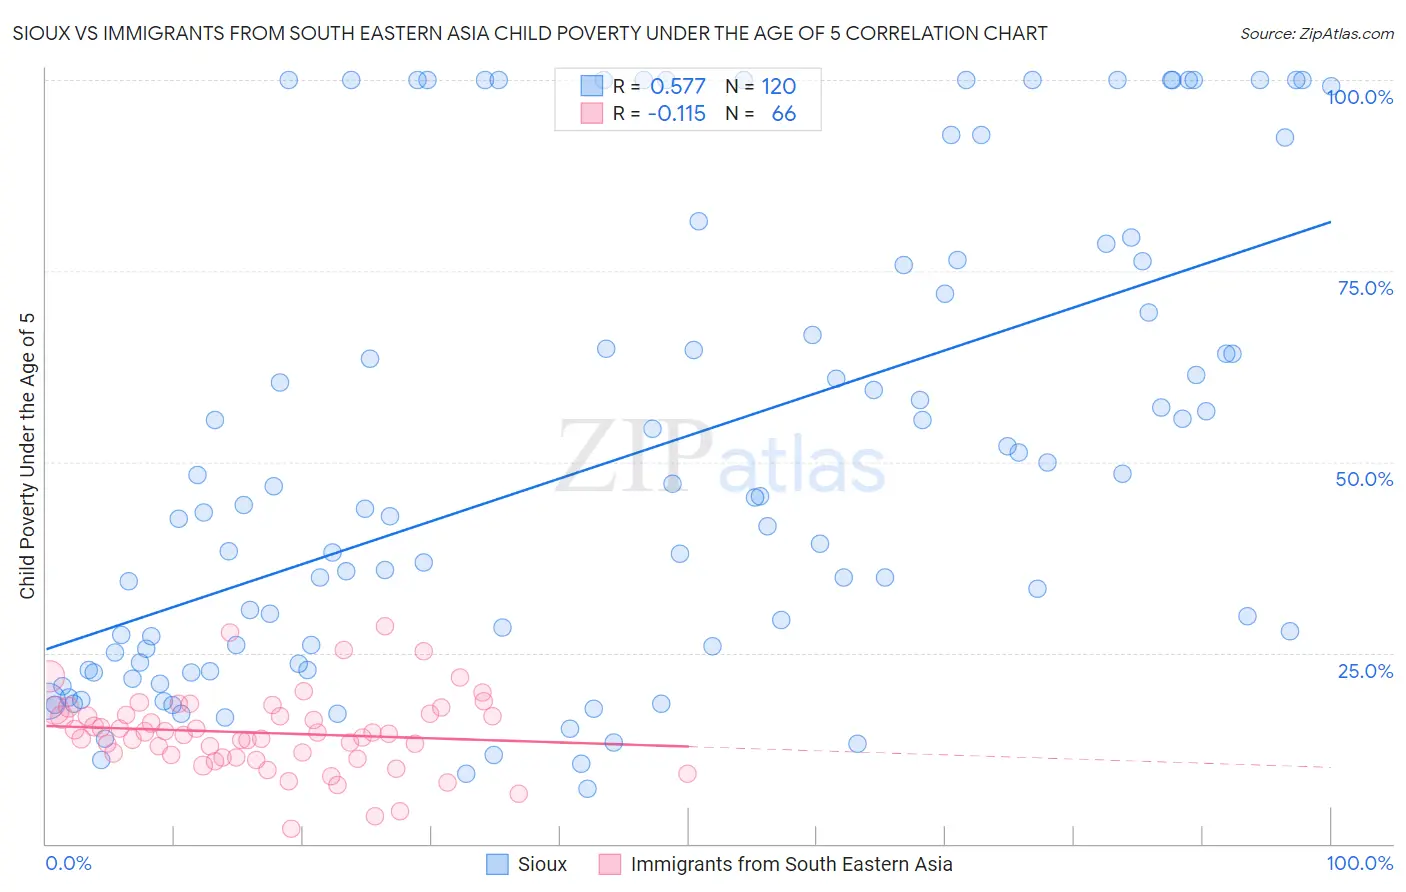 Sioux vs Immigrants from South Eastern Asia Child Poverty Under the Age of 5